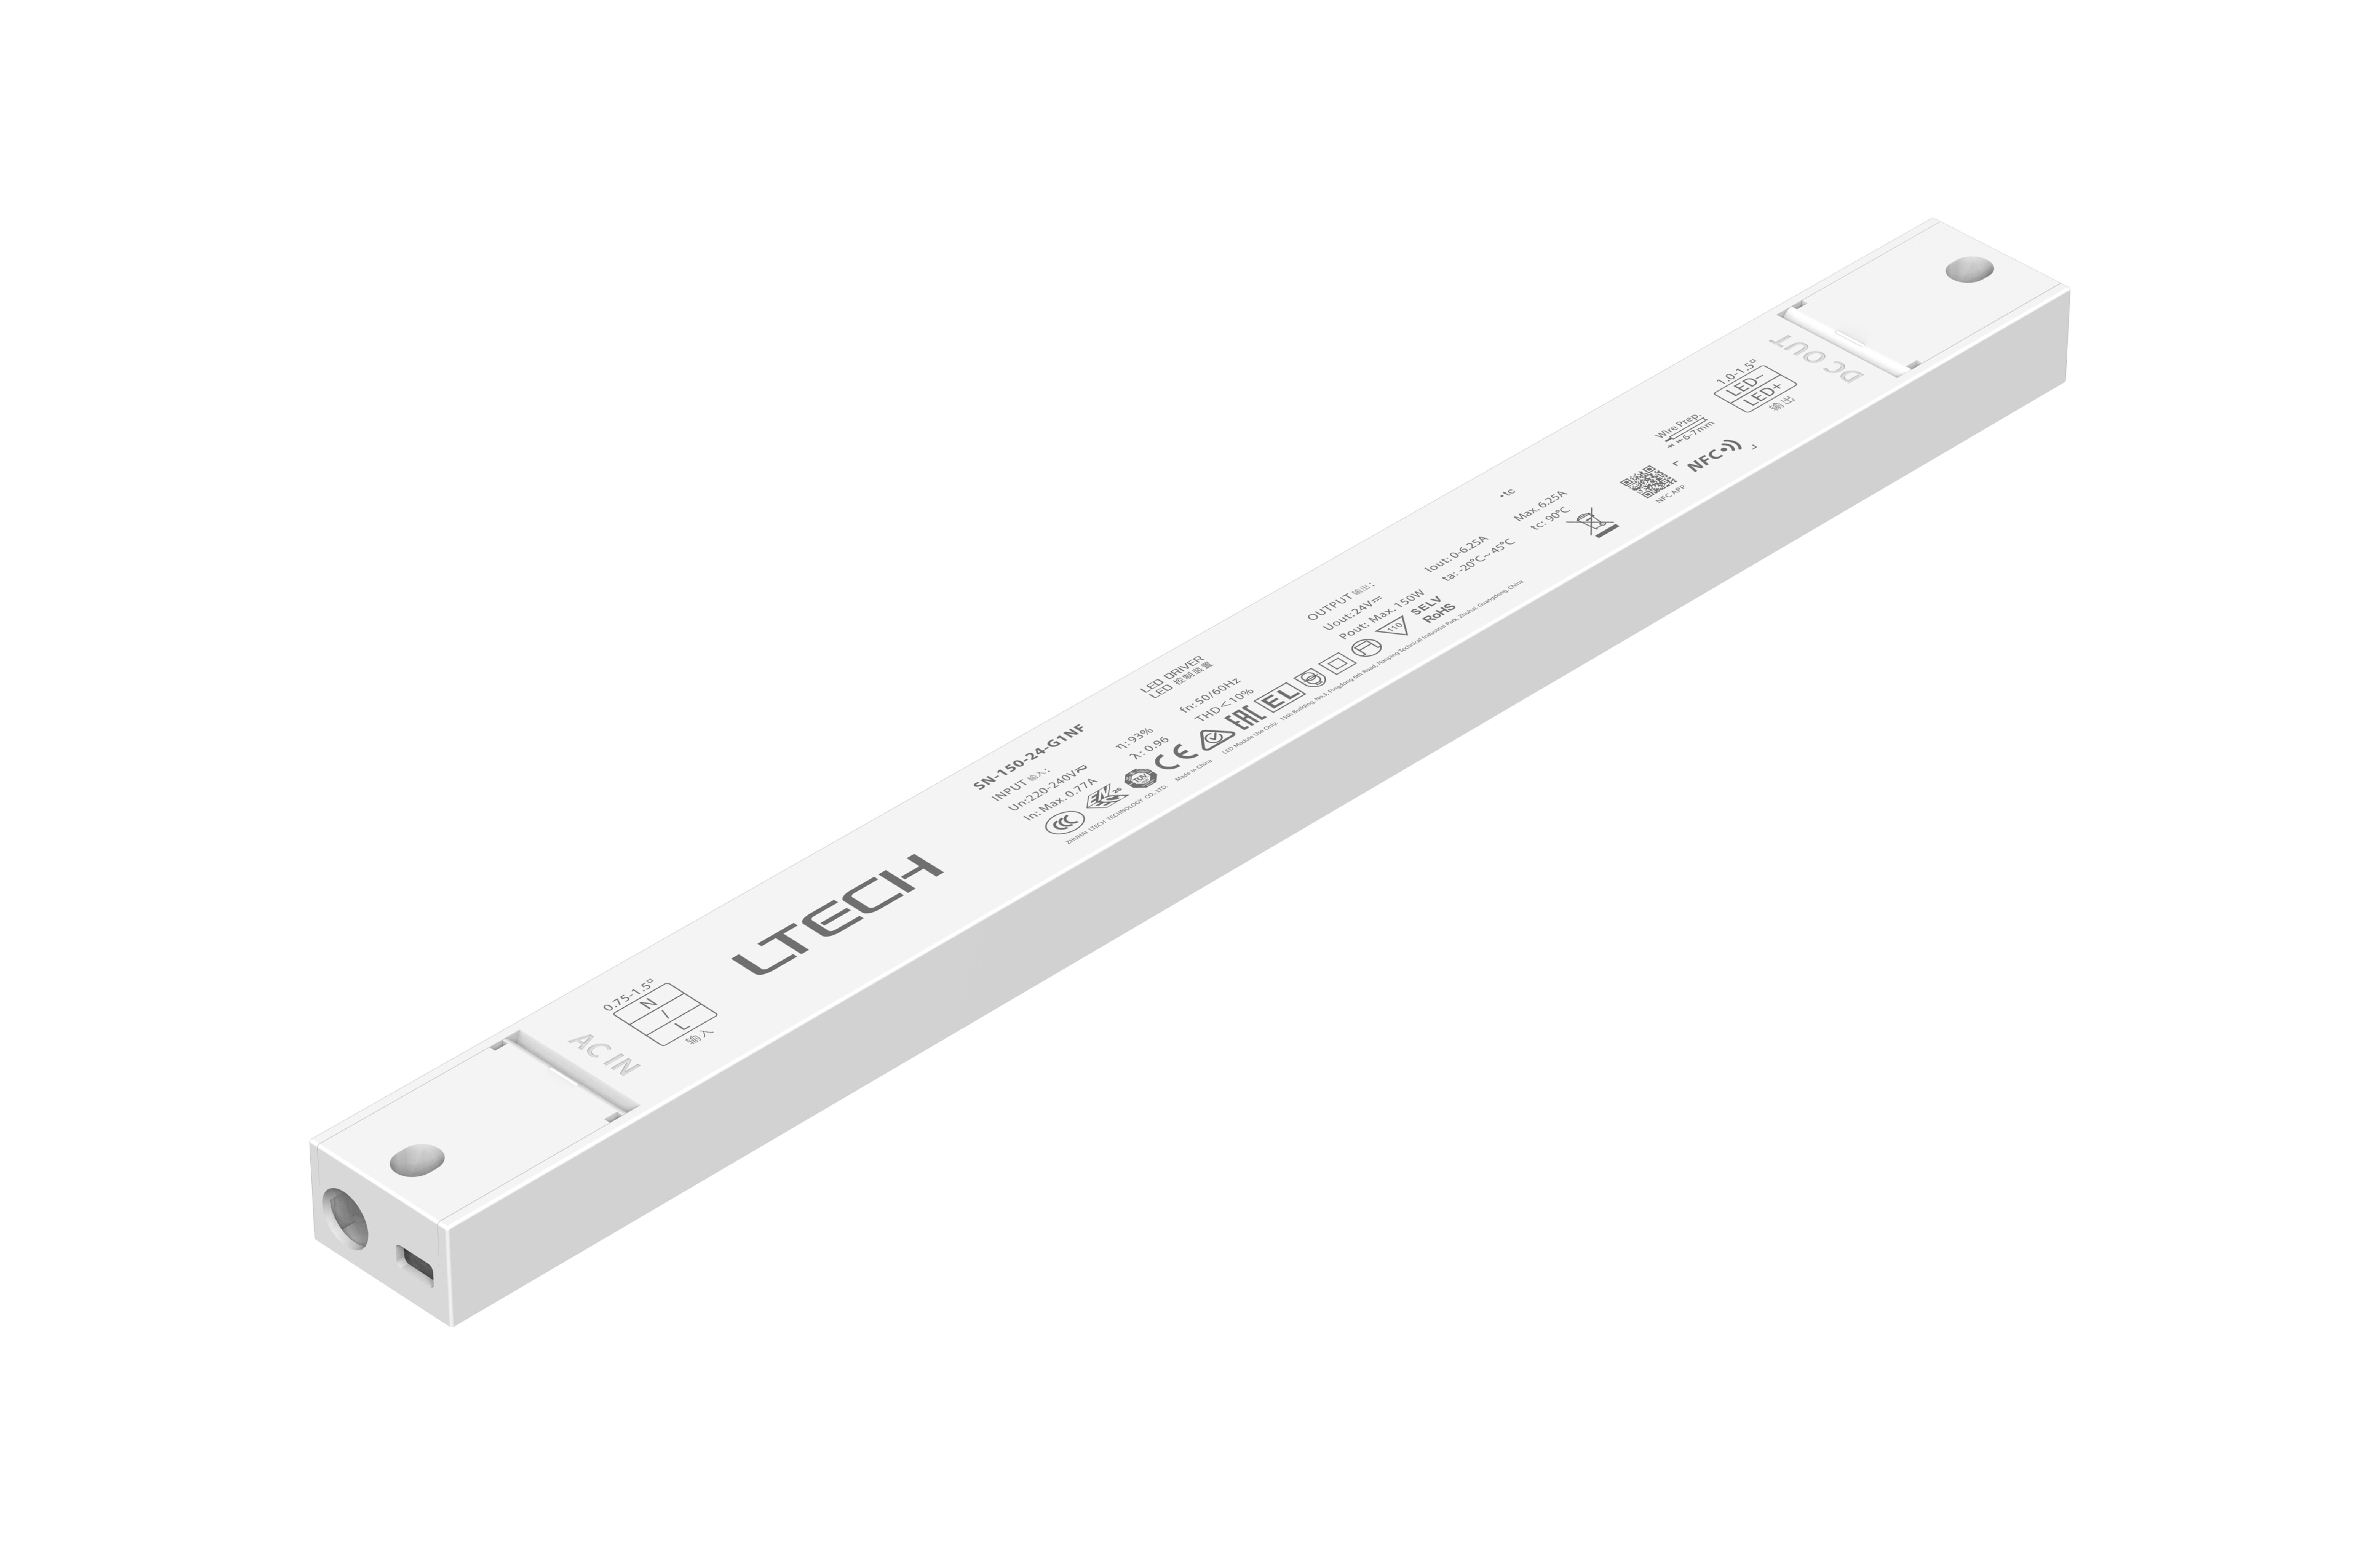 SN-150-24-G1NF-NFC  Intelligent Constant Current NFC ON/OFF LED Driver,  150W, 24VDC 6.25A , 220-240Vac, IP20, 5yrs Warrenty.